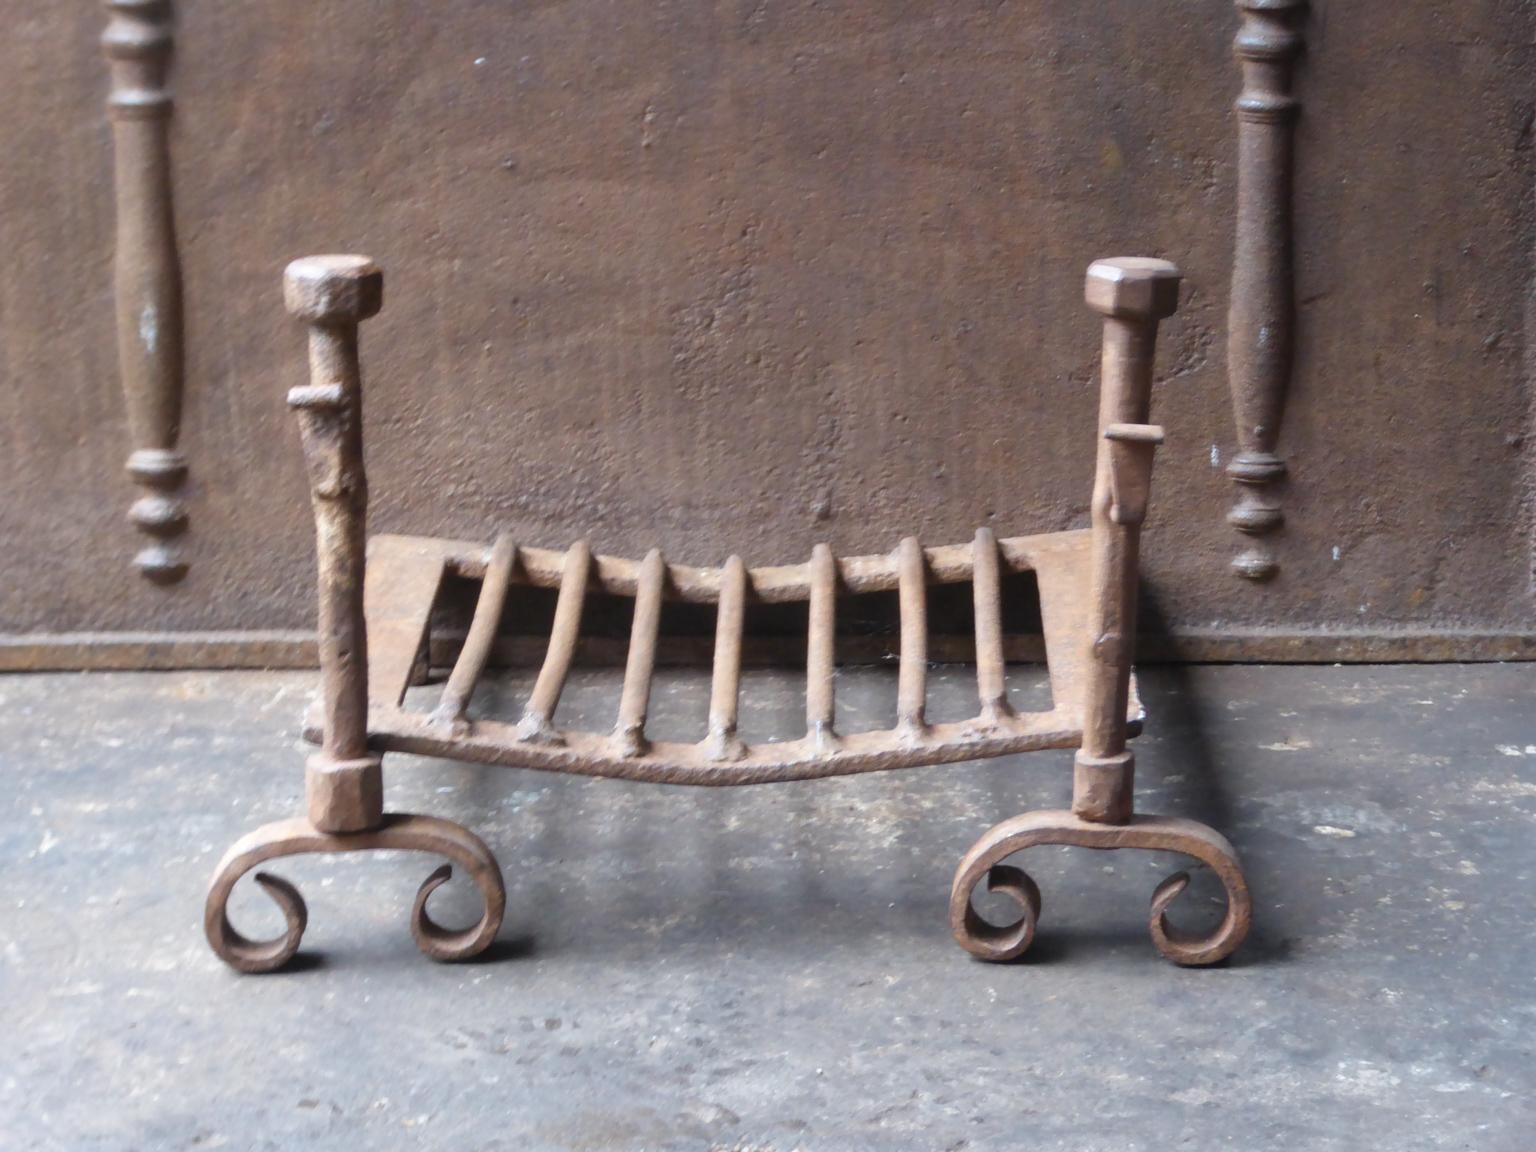 18th century French Louis XV fireplace basket, fire basket made of wrought iron. The basket is in a good condition and is fully functional.